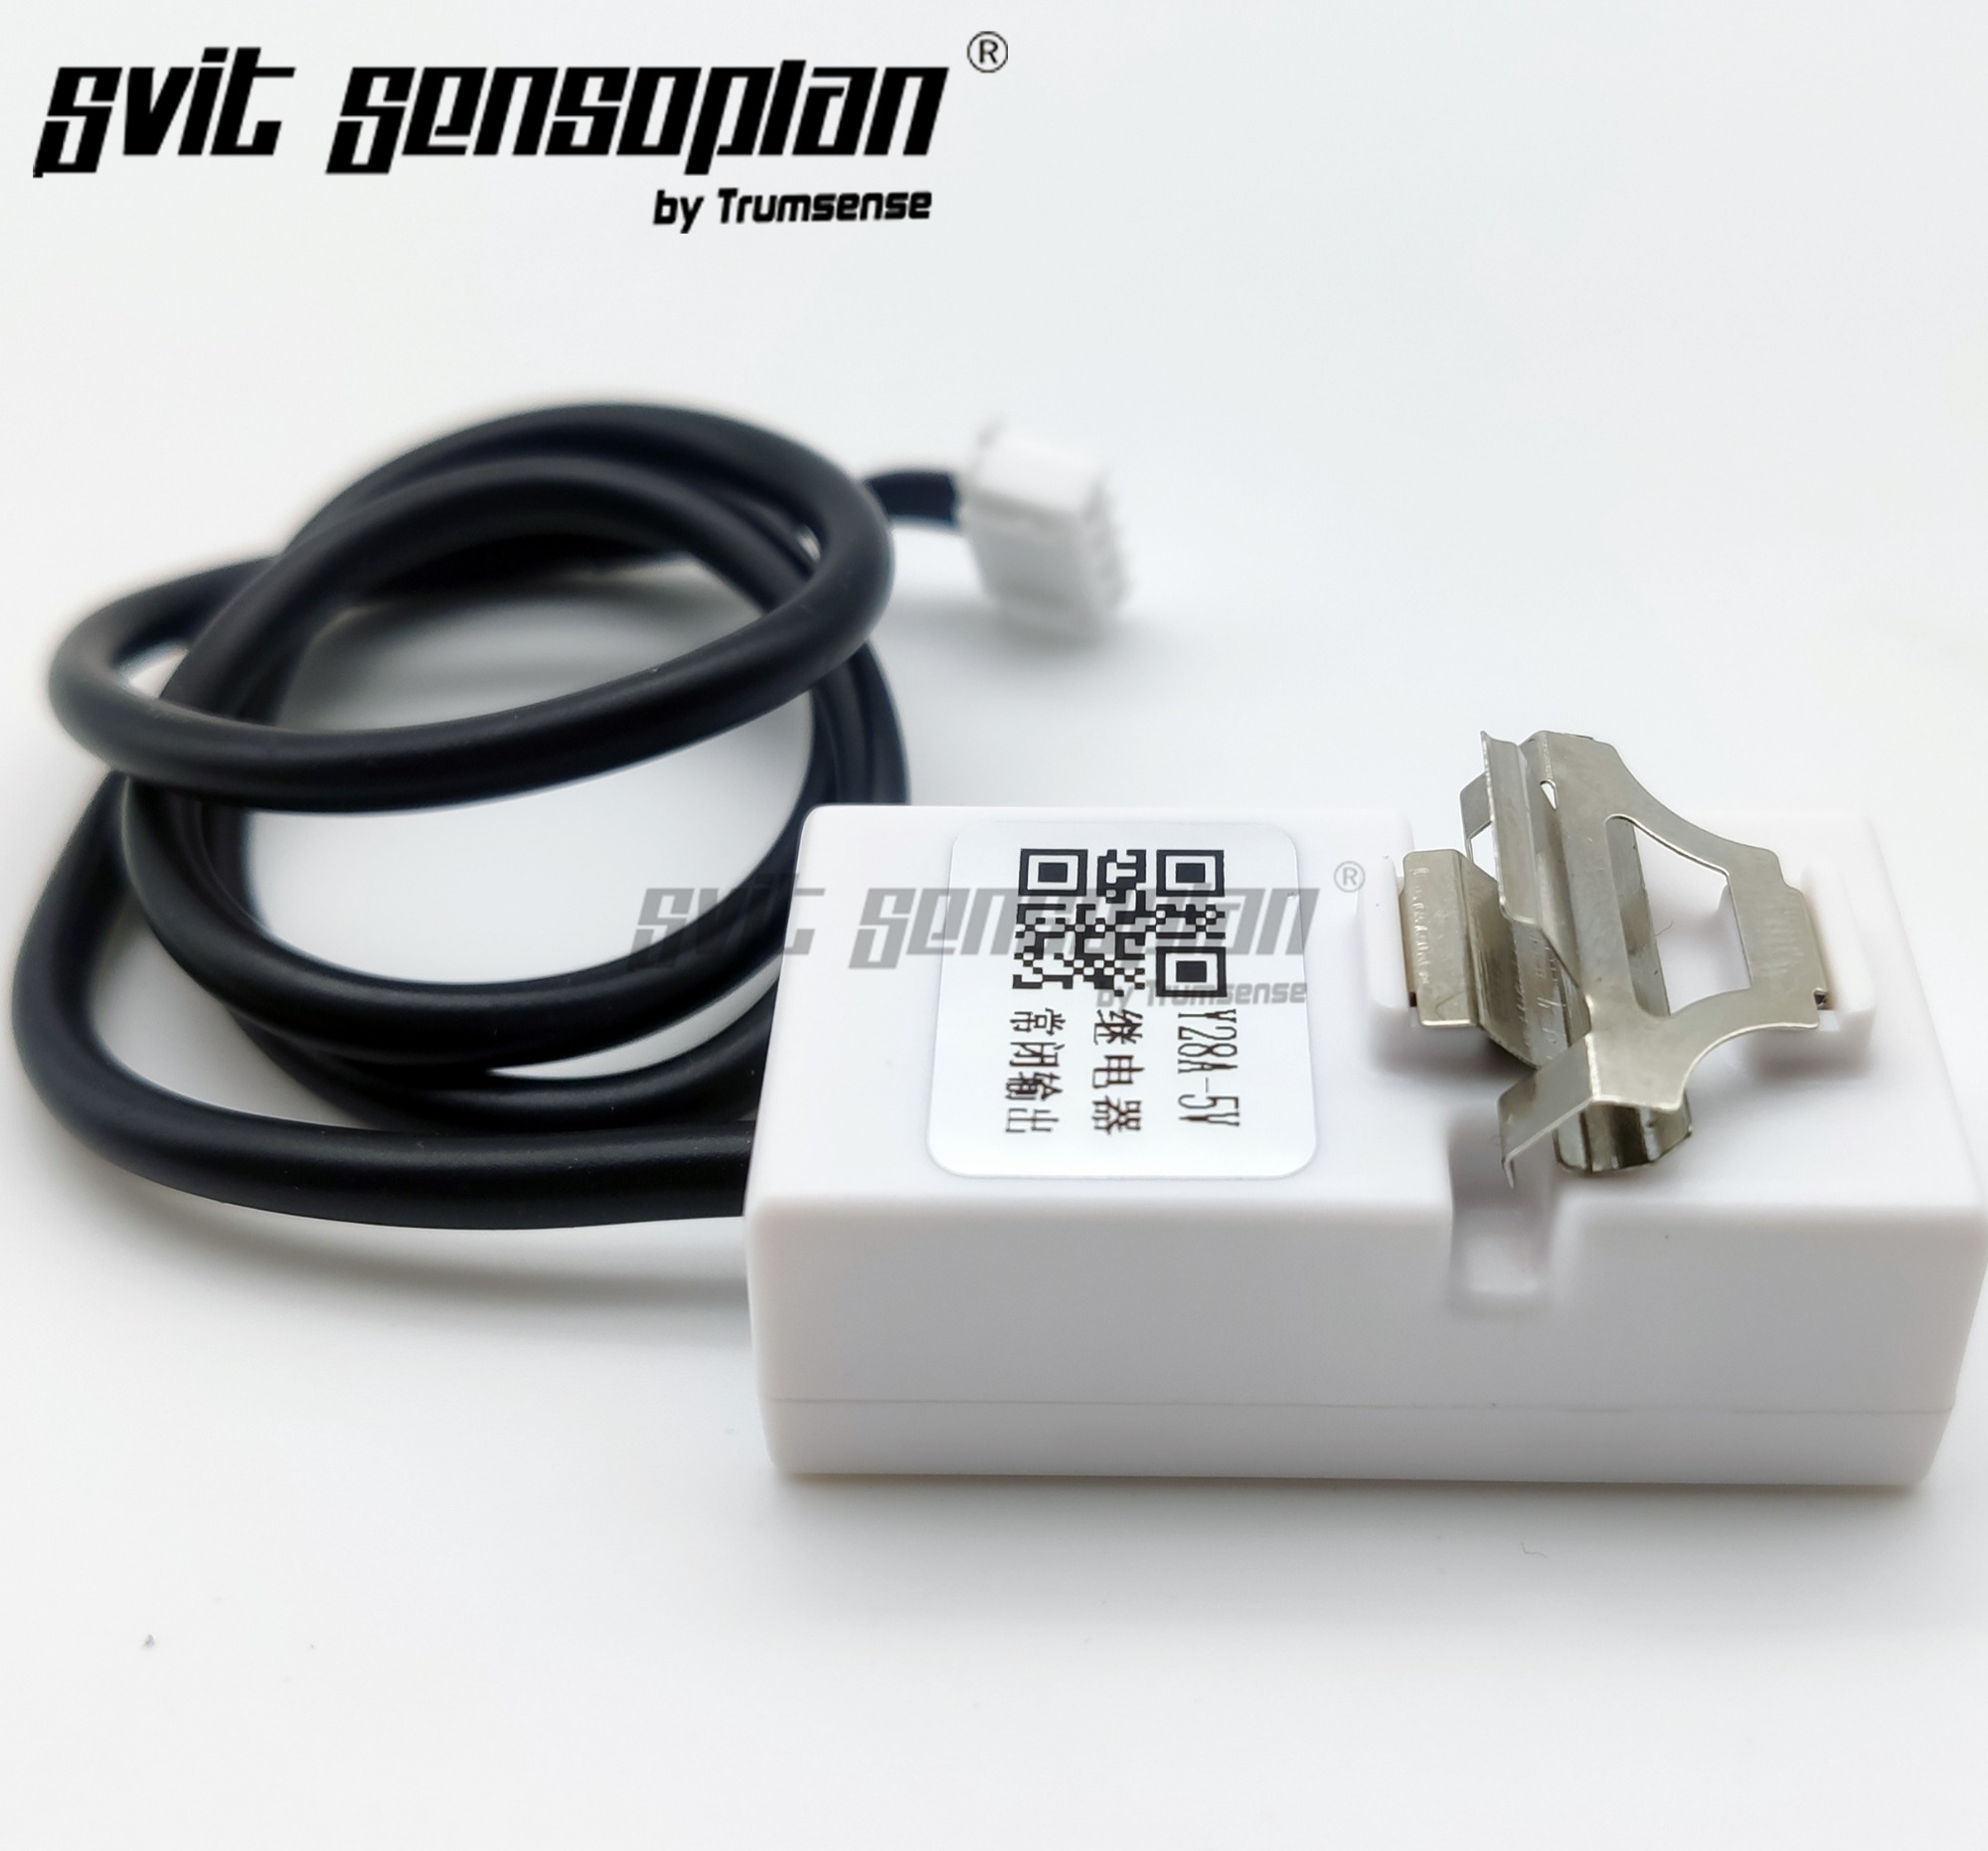 Trumsense XKC-Y28A 5V Contactless Water Level Sensor for Small Diameter Liquid Hose Pipe Normal Open Output With built-in Relay